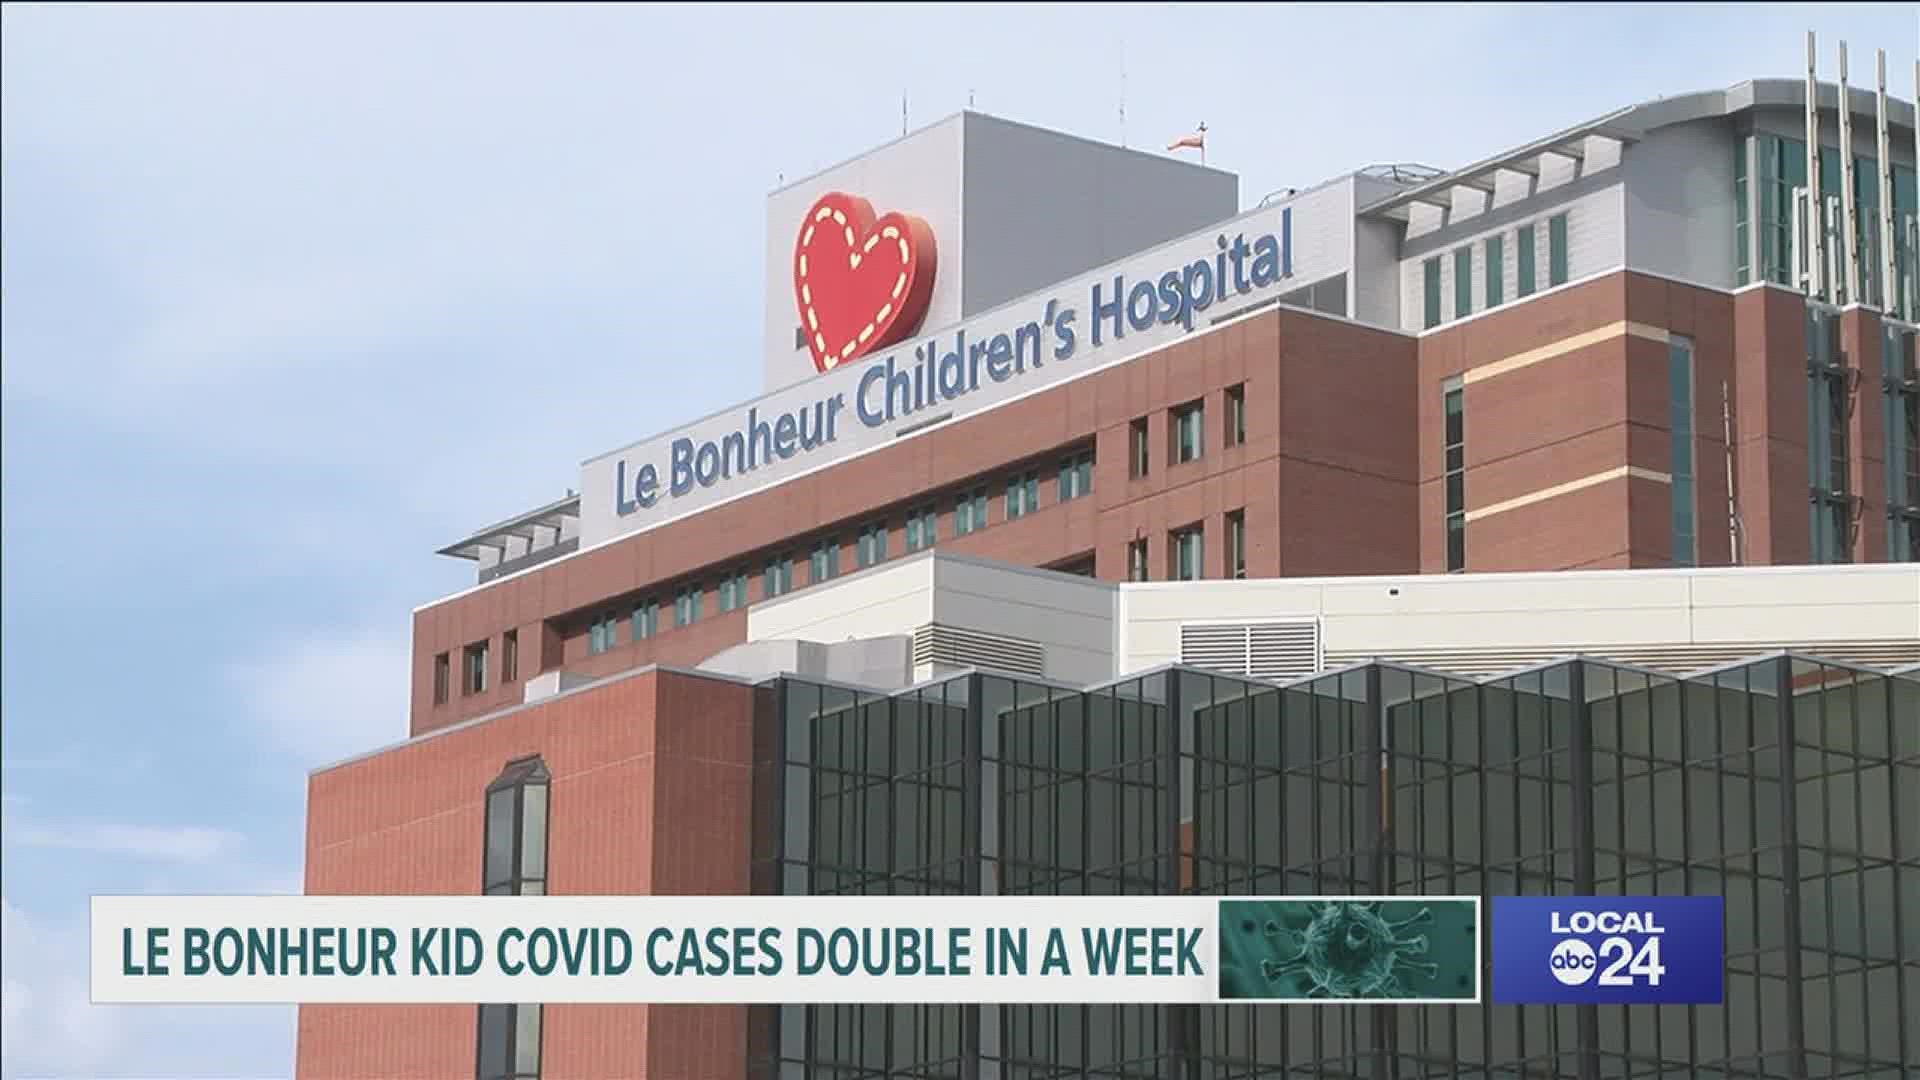 Le Bonheur Children's Hospital COVID cases have doubled in the past week.